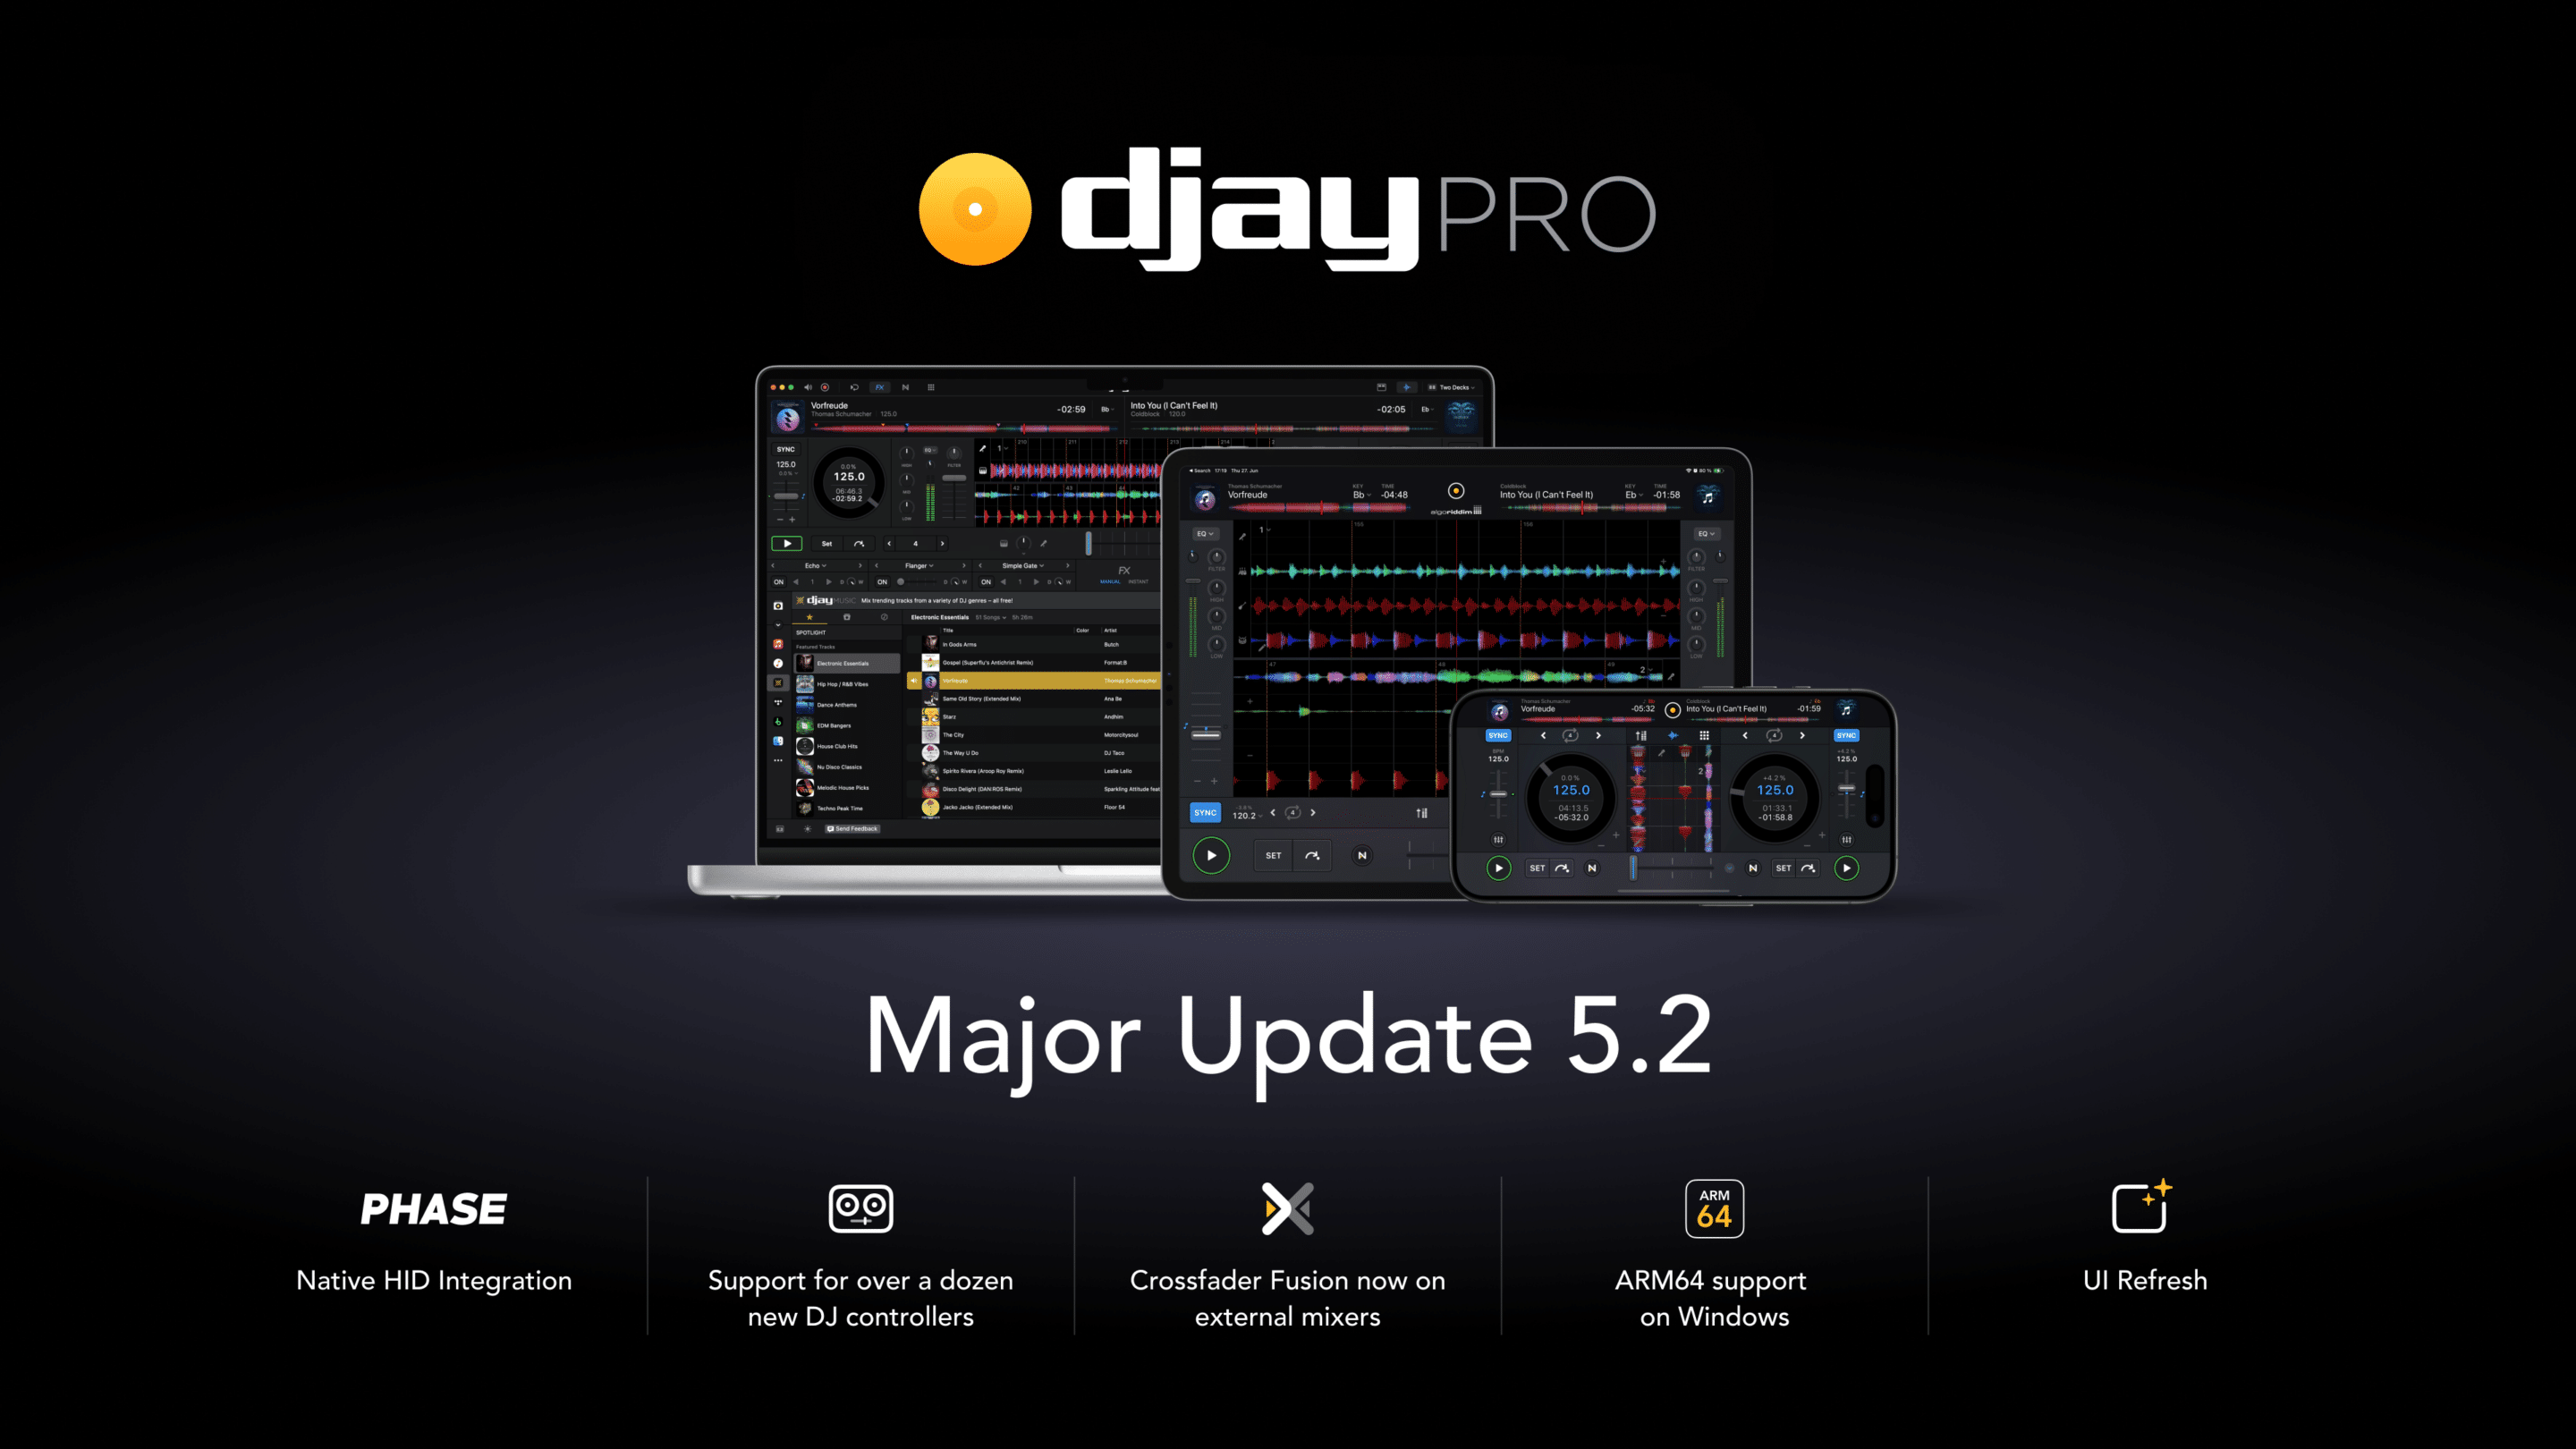 djay pro 5.2 has landed… with some INSANE updates!